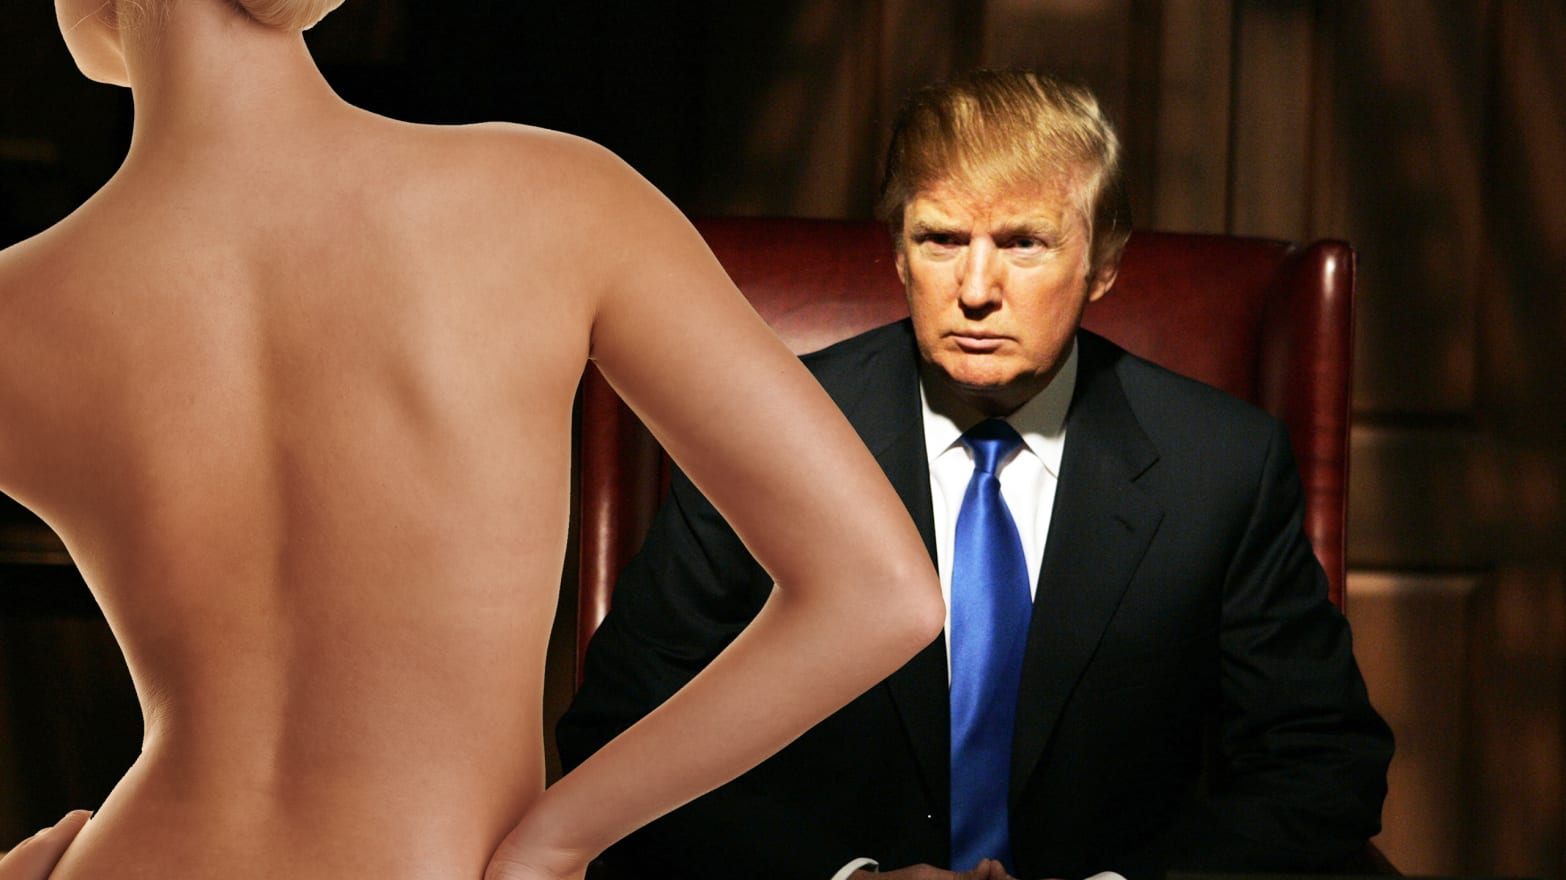 aman somani recommends Naked Pictures Of Donald Trumps Wife